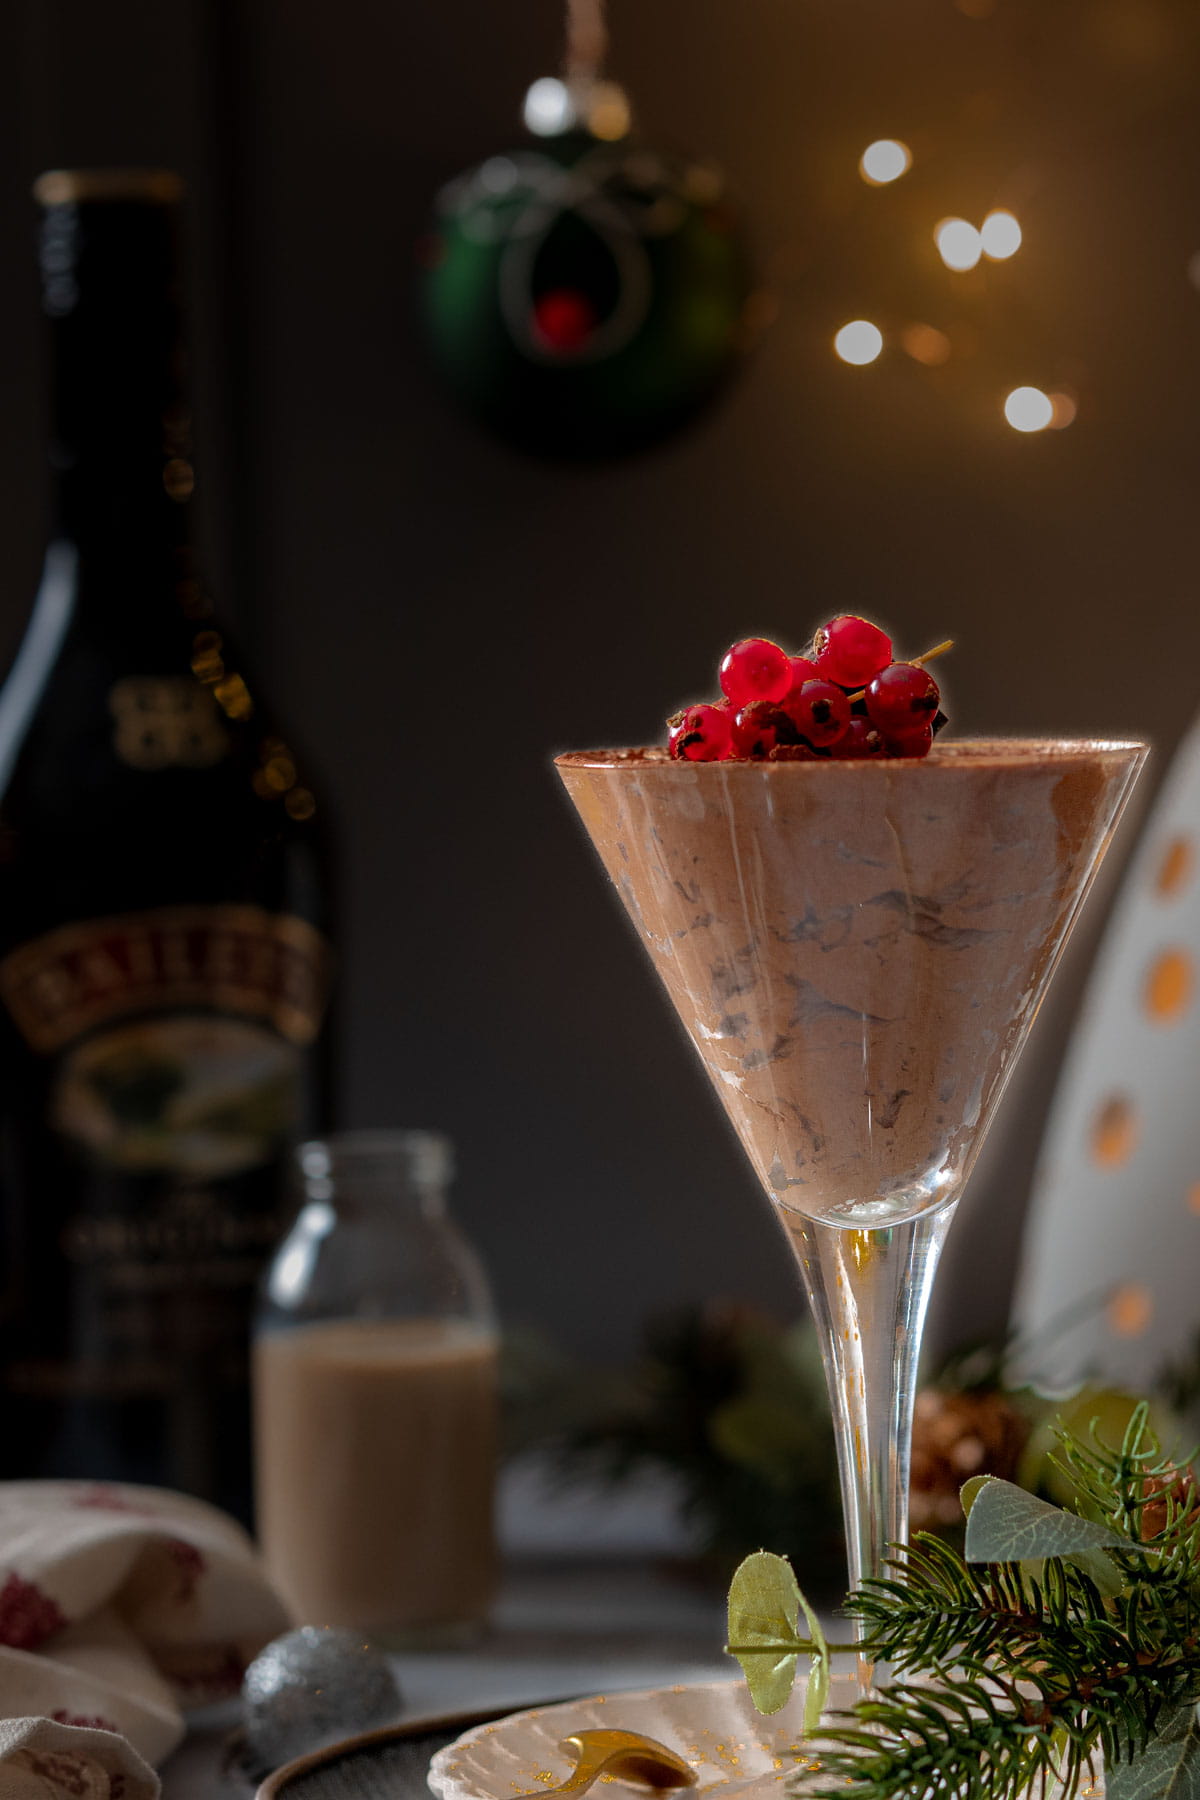 Baileys Chocolate Mousse in a martini glass on a table surrounded by Christmas baubles and fairy lights.